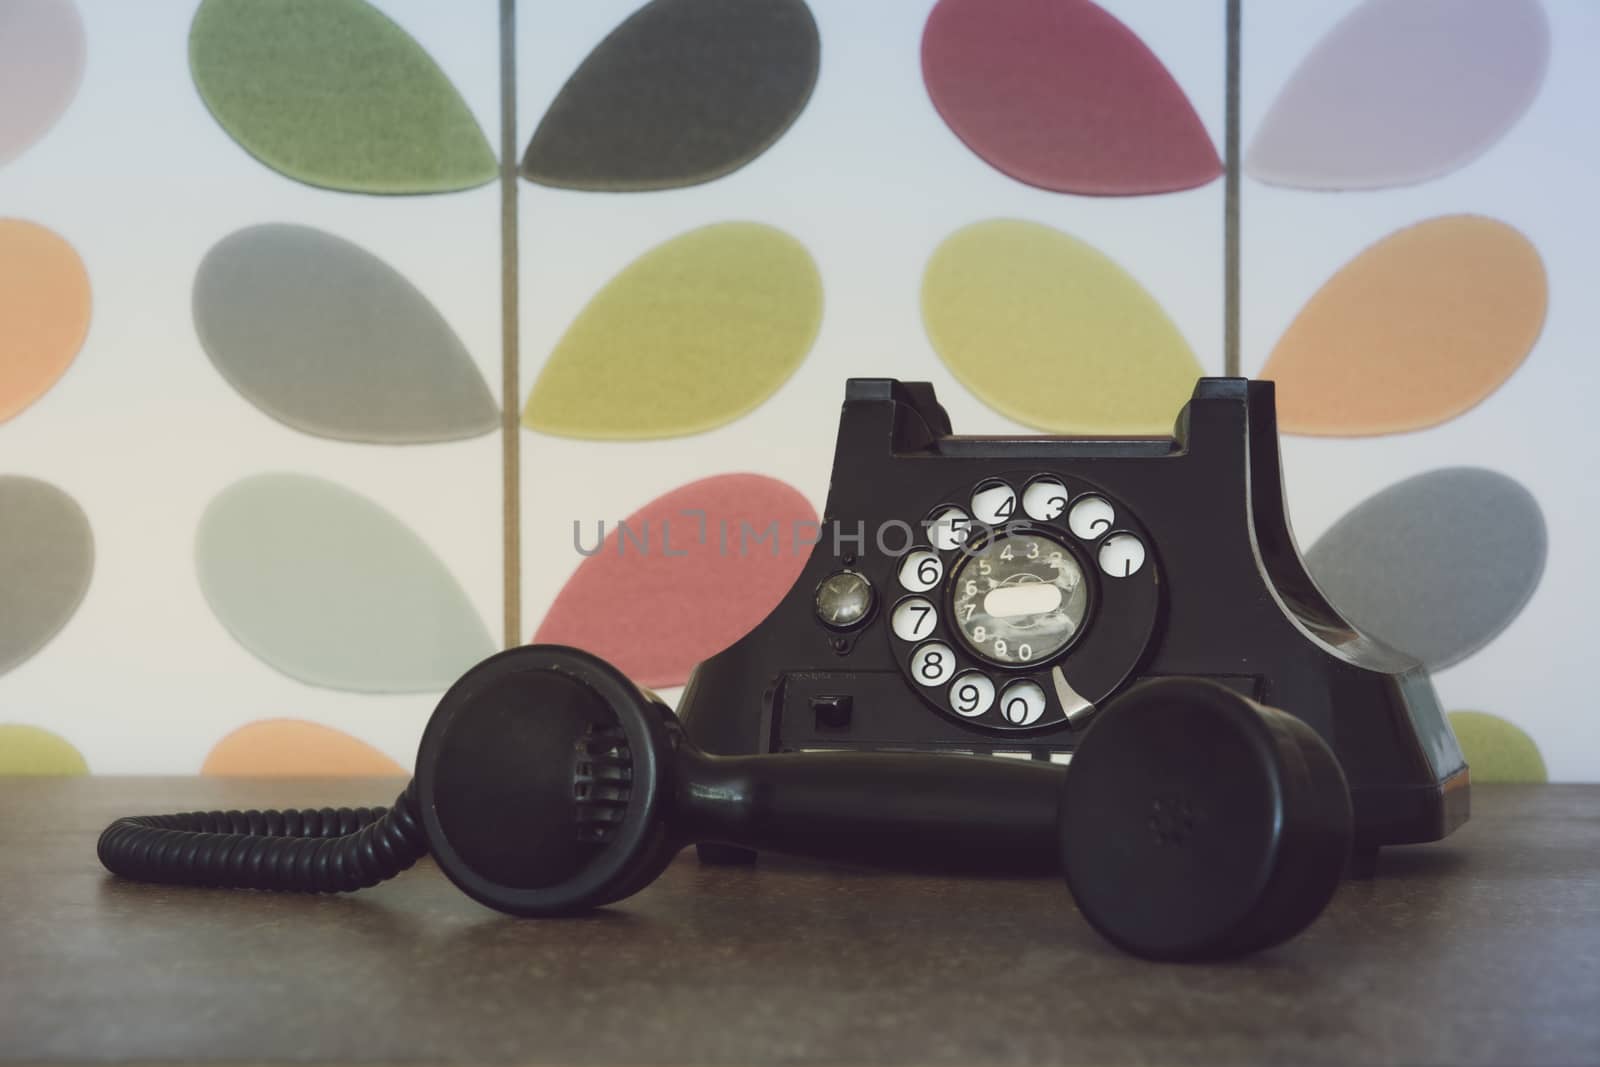 Old retro and vintage phone off the hook against colorful wallpaper by kb79